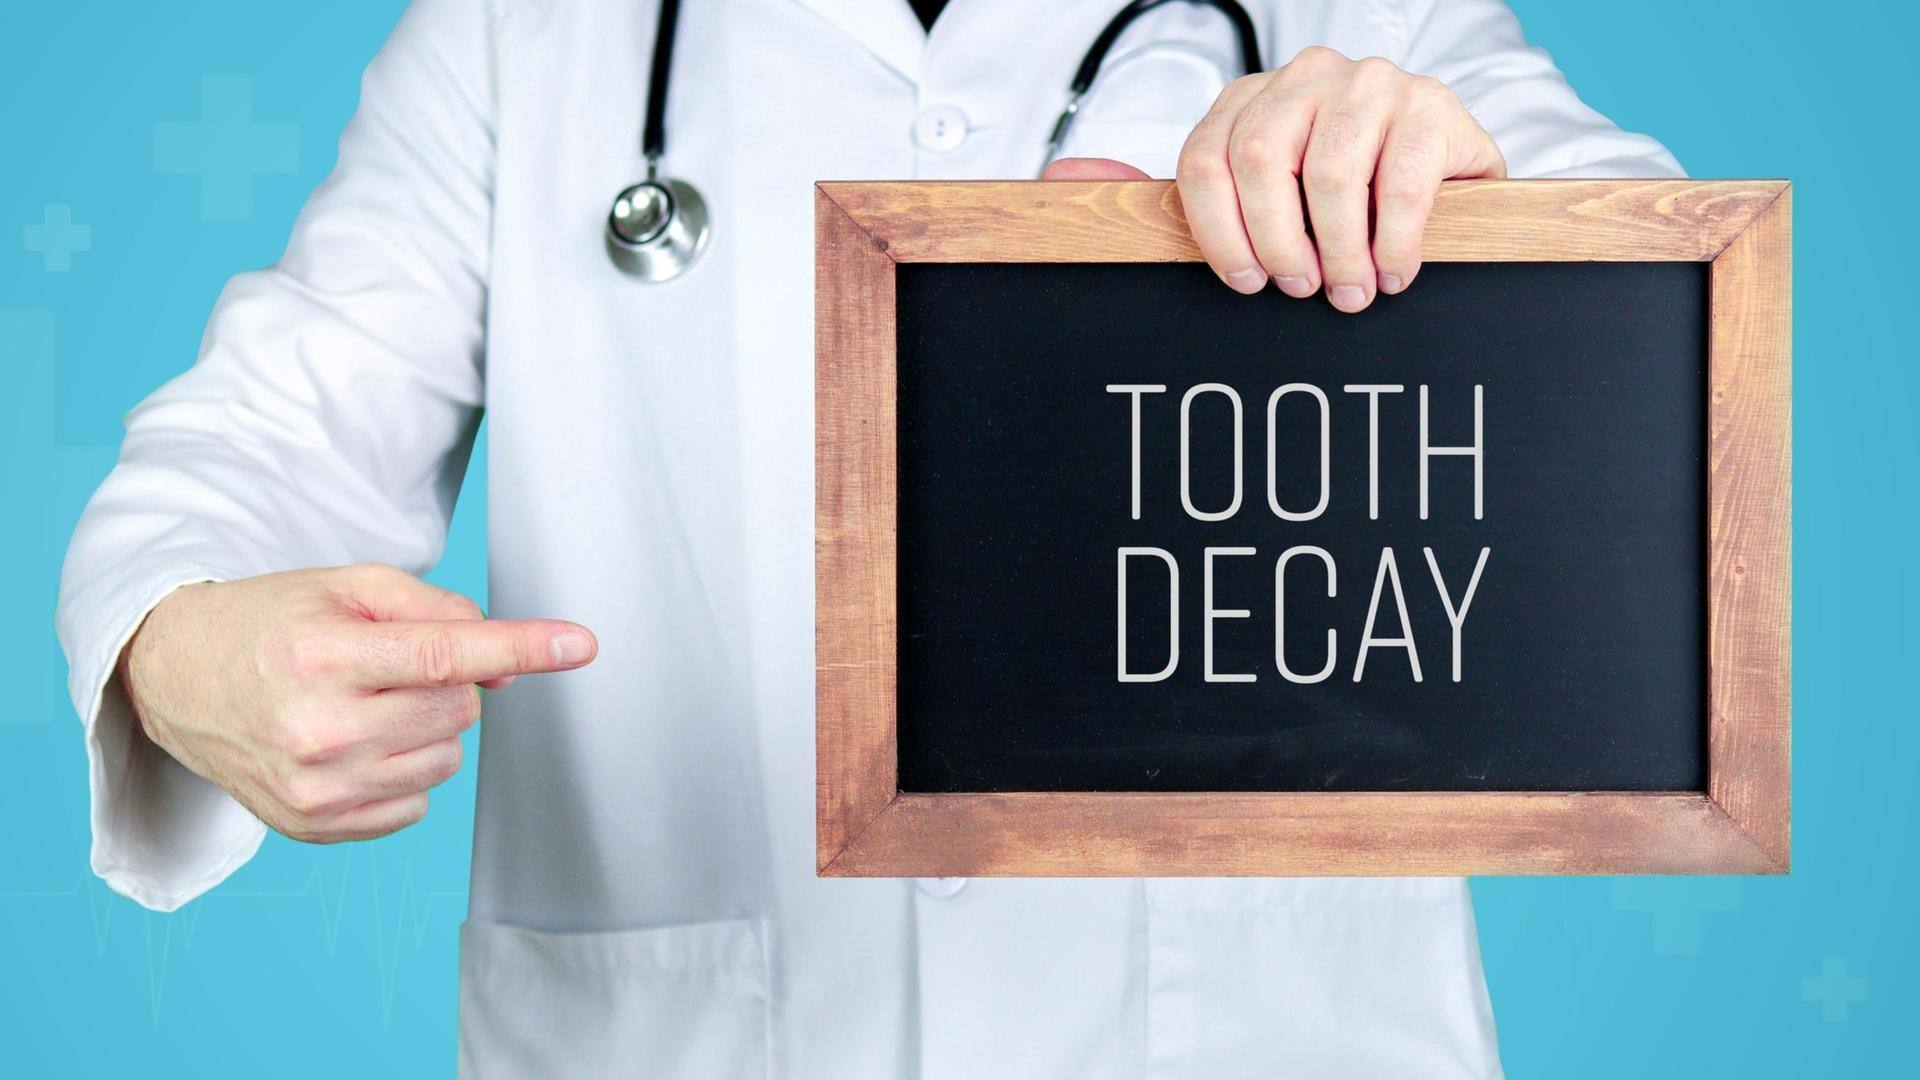 Tooth decay: Home remedies that can prevent it